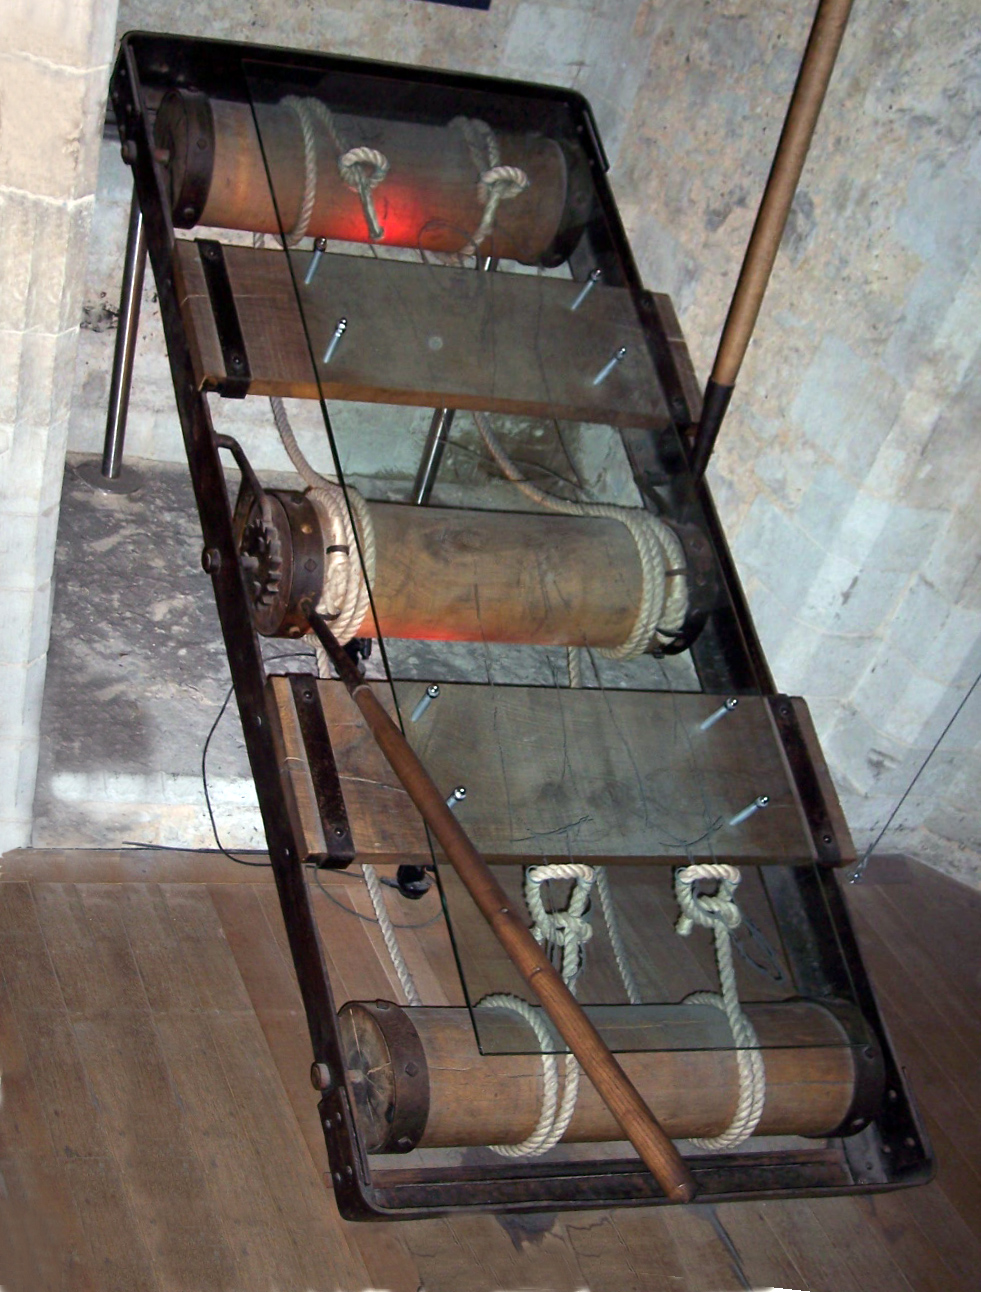 The Rack Torture - The torturer turned the handle causing the ropes to pull the victim's arms and legs. Eventually, the victim's bones were dislocated with a loud crack. If the torturer kept turning the handles, some of the limbs were torn apart, usually the arms.